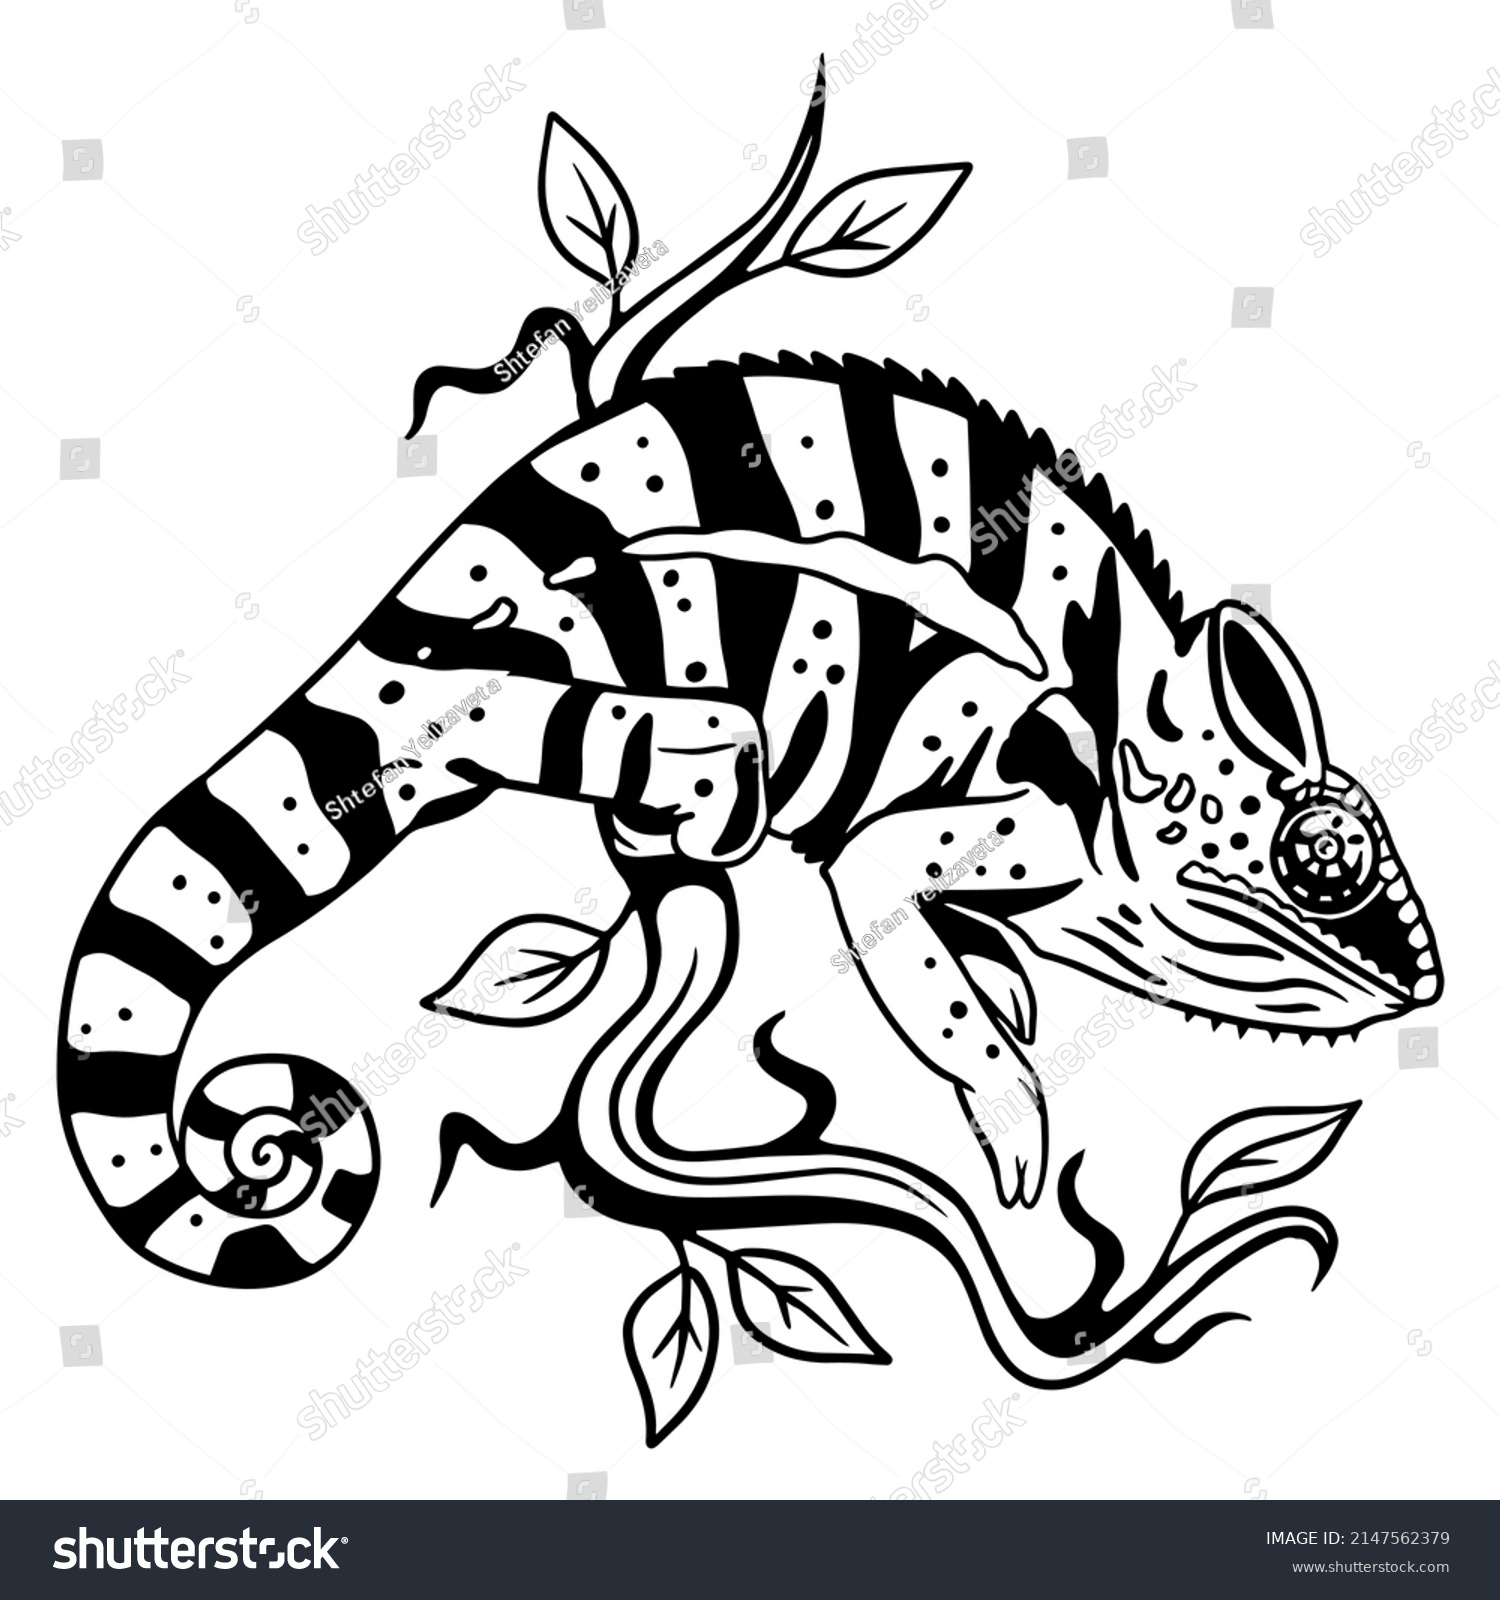 SVG of Chameleon sitting on a branch. Vector illustration for cutting vinyl and printing svg